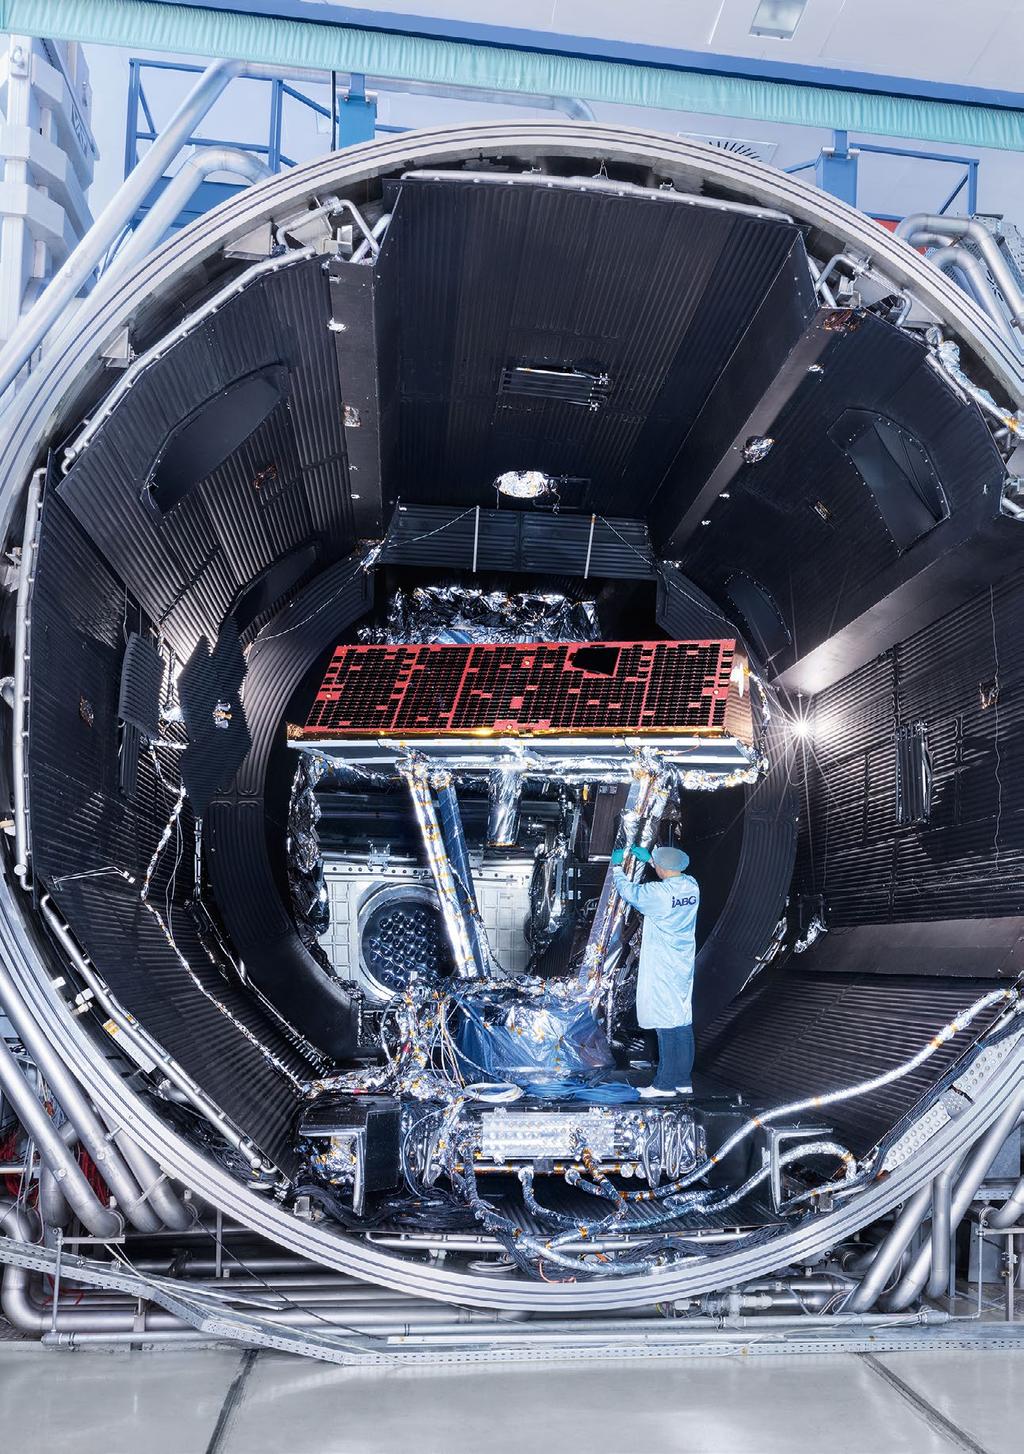 Thermal vacuum tests Reliability when things start heating up The Gravity Recovery and Climate